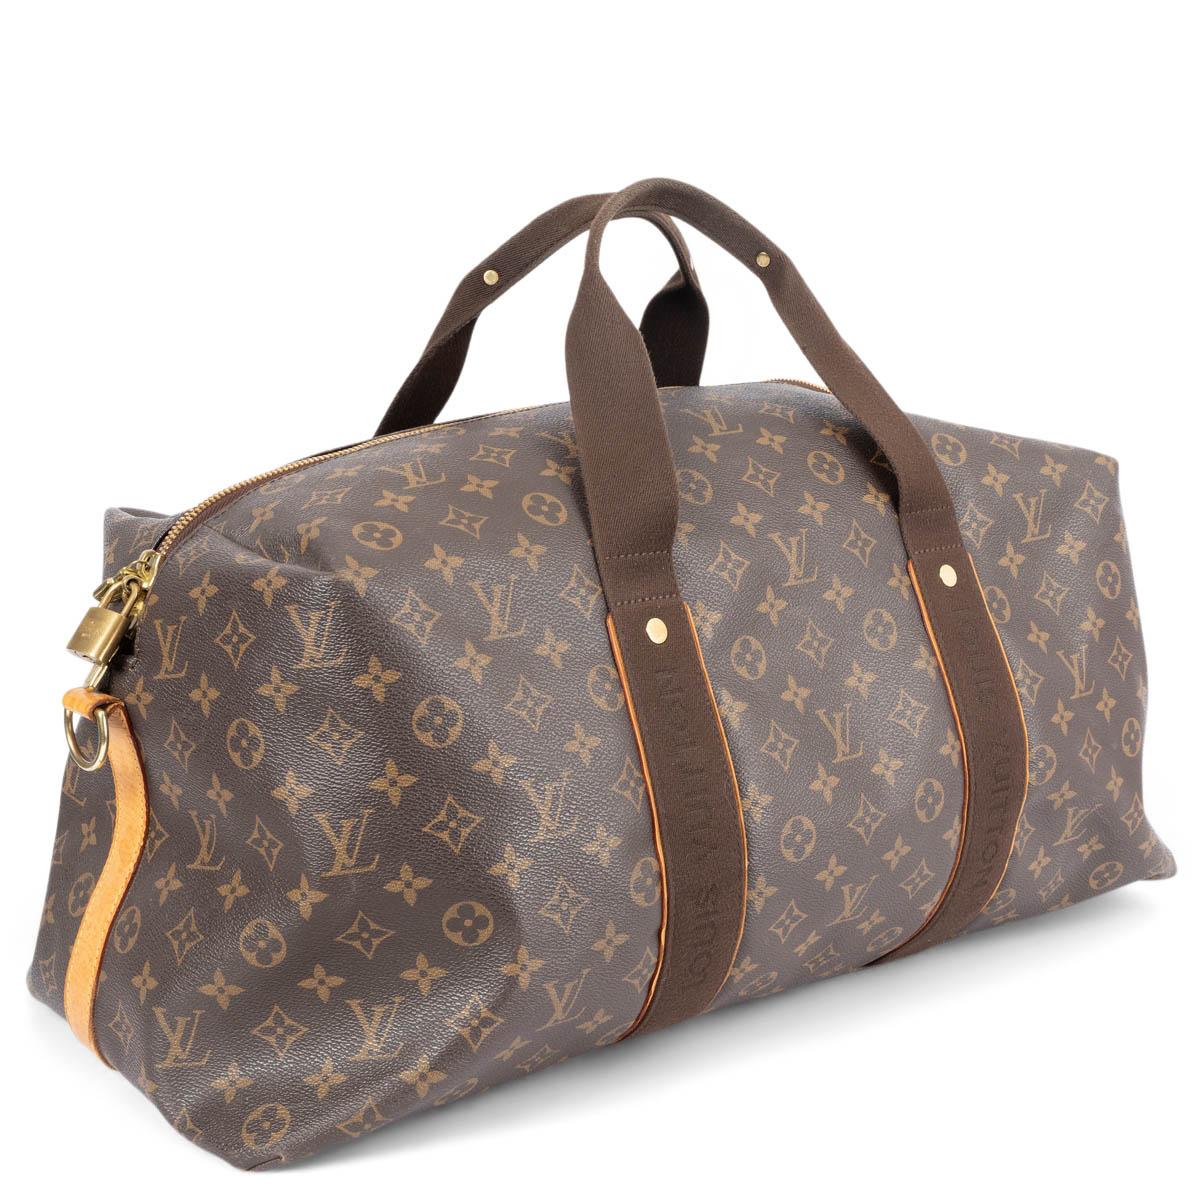 100% authentic Louis Vuitton Beaubourg GM weekender in brown and olive green monogram canvas. The bag features canvas top handles and an adjustable shoulder strap in brown canvas with vachetta cowhide leather detailing and gold-tone brass hardware.